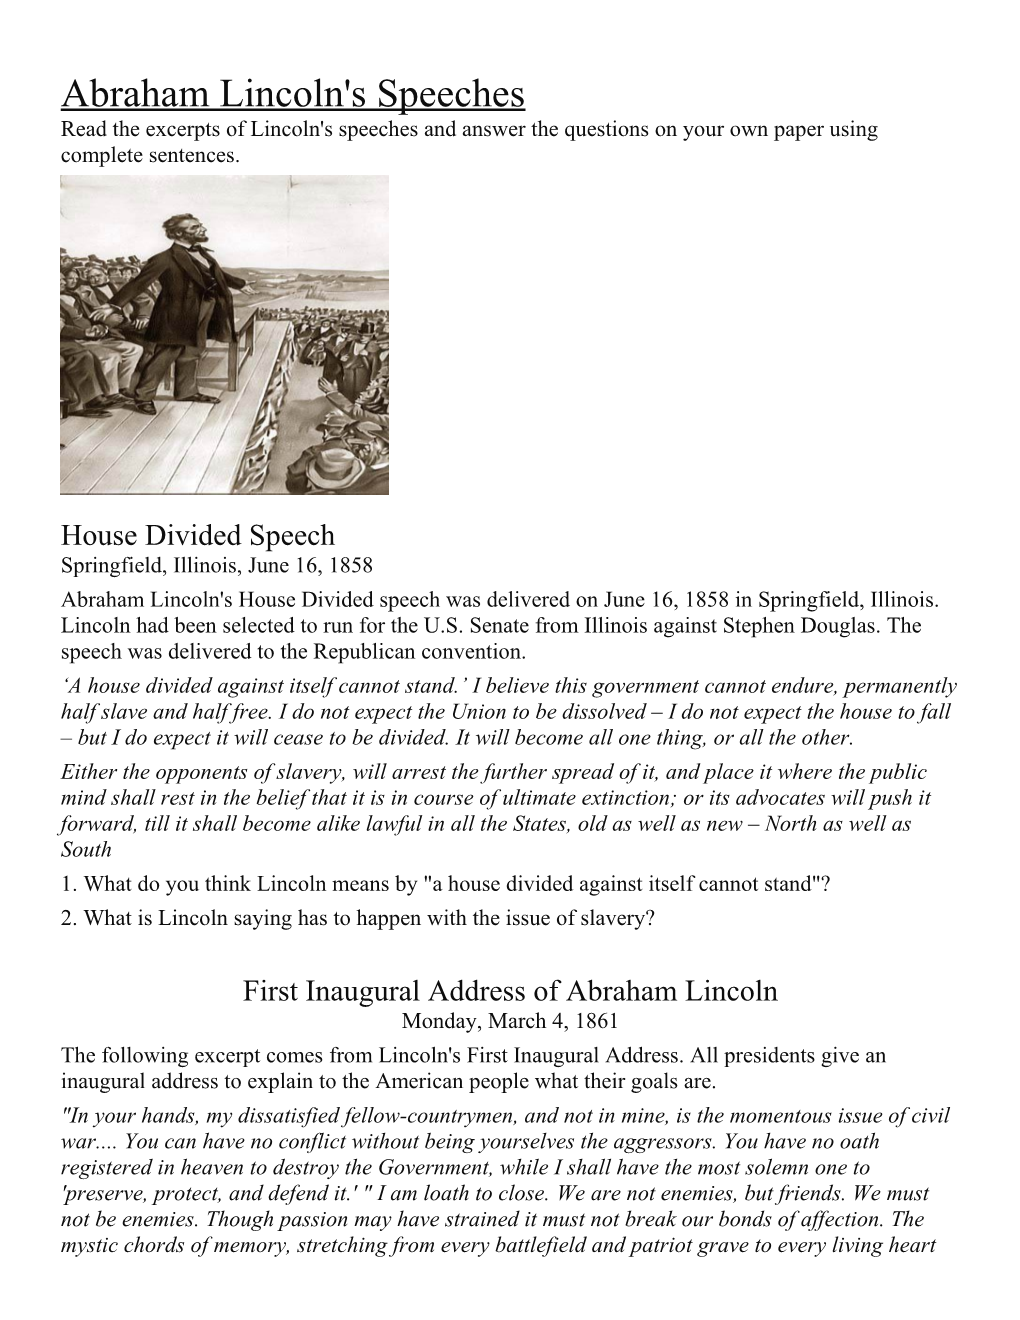 Abraham Lincoln's Speeches Read the Excerpts of Lincoln's Speeches and Answer the Questions